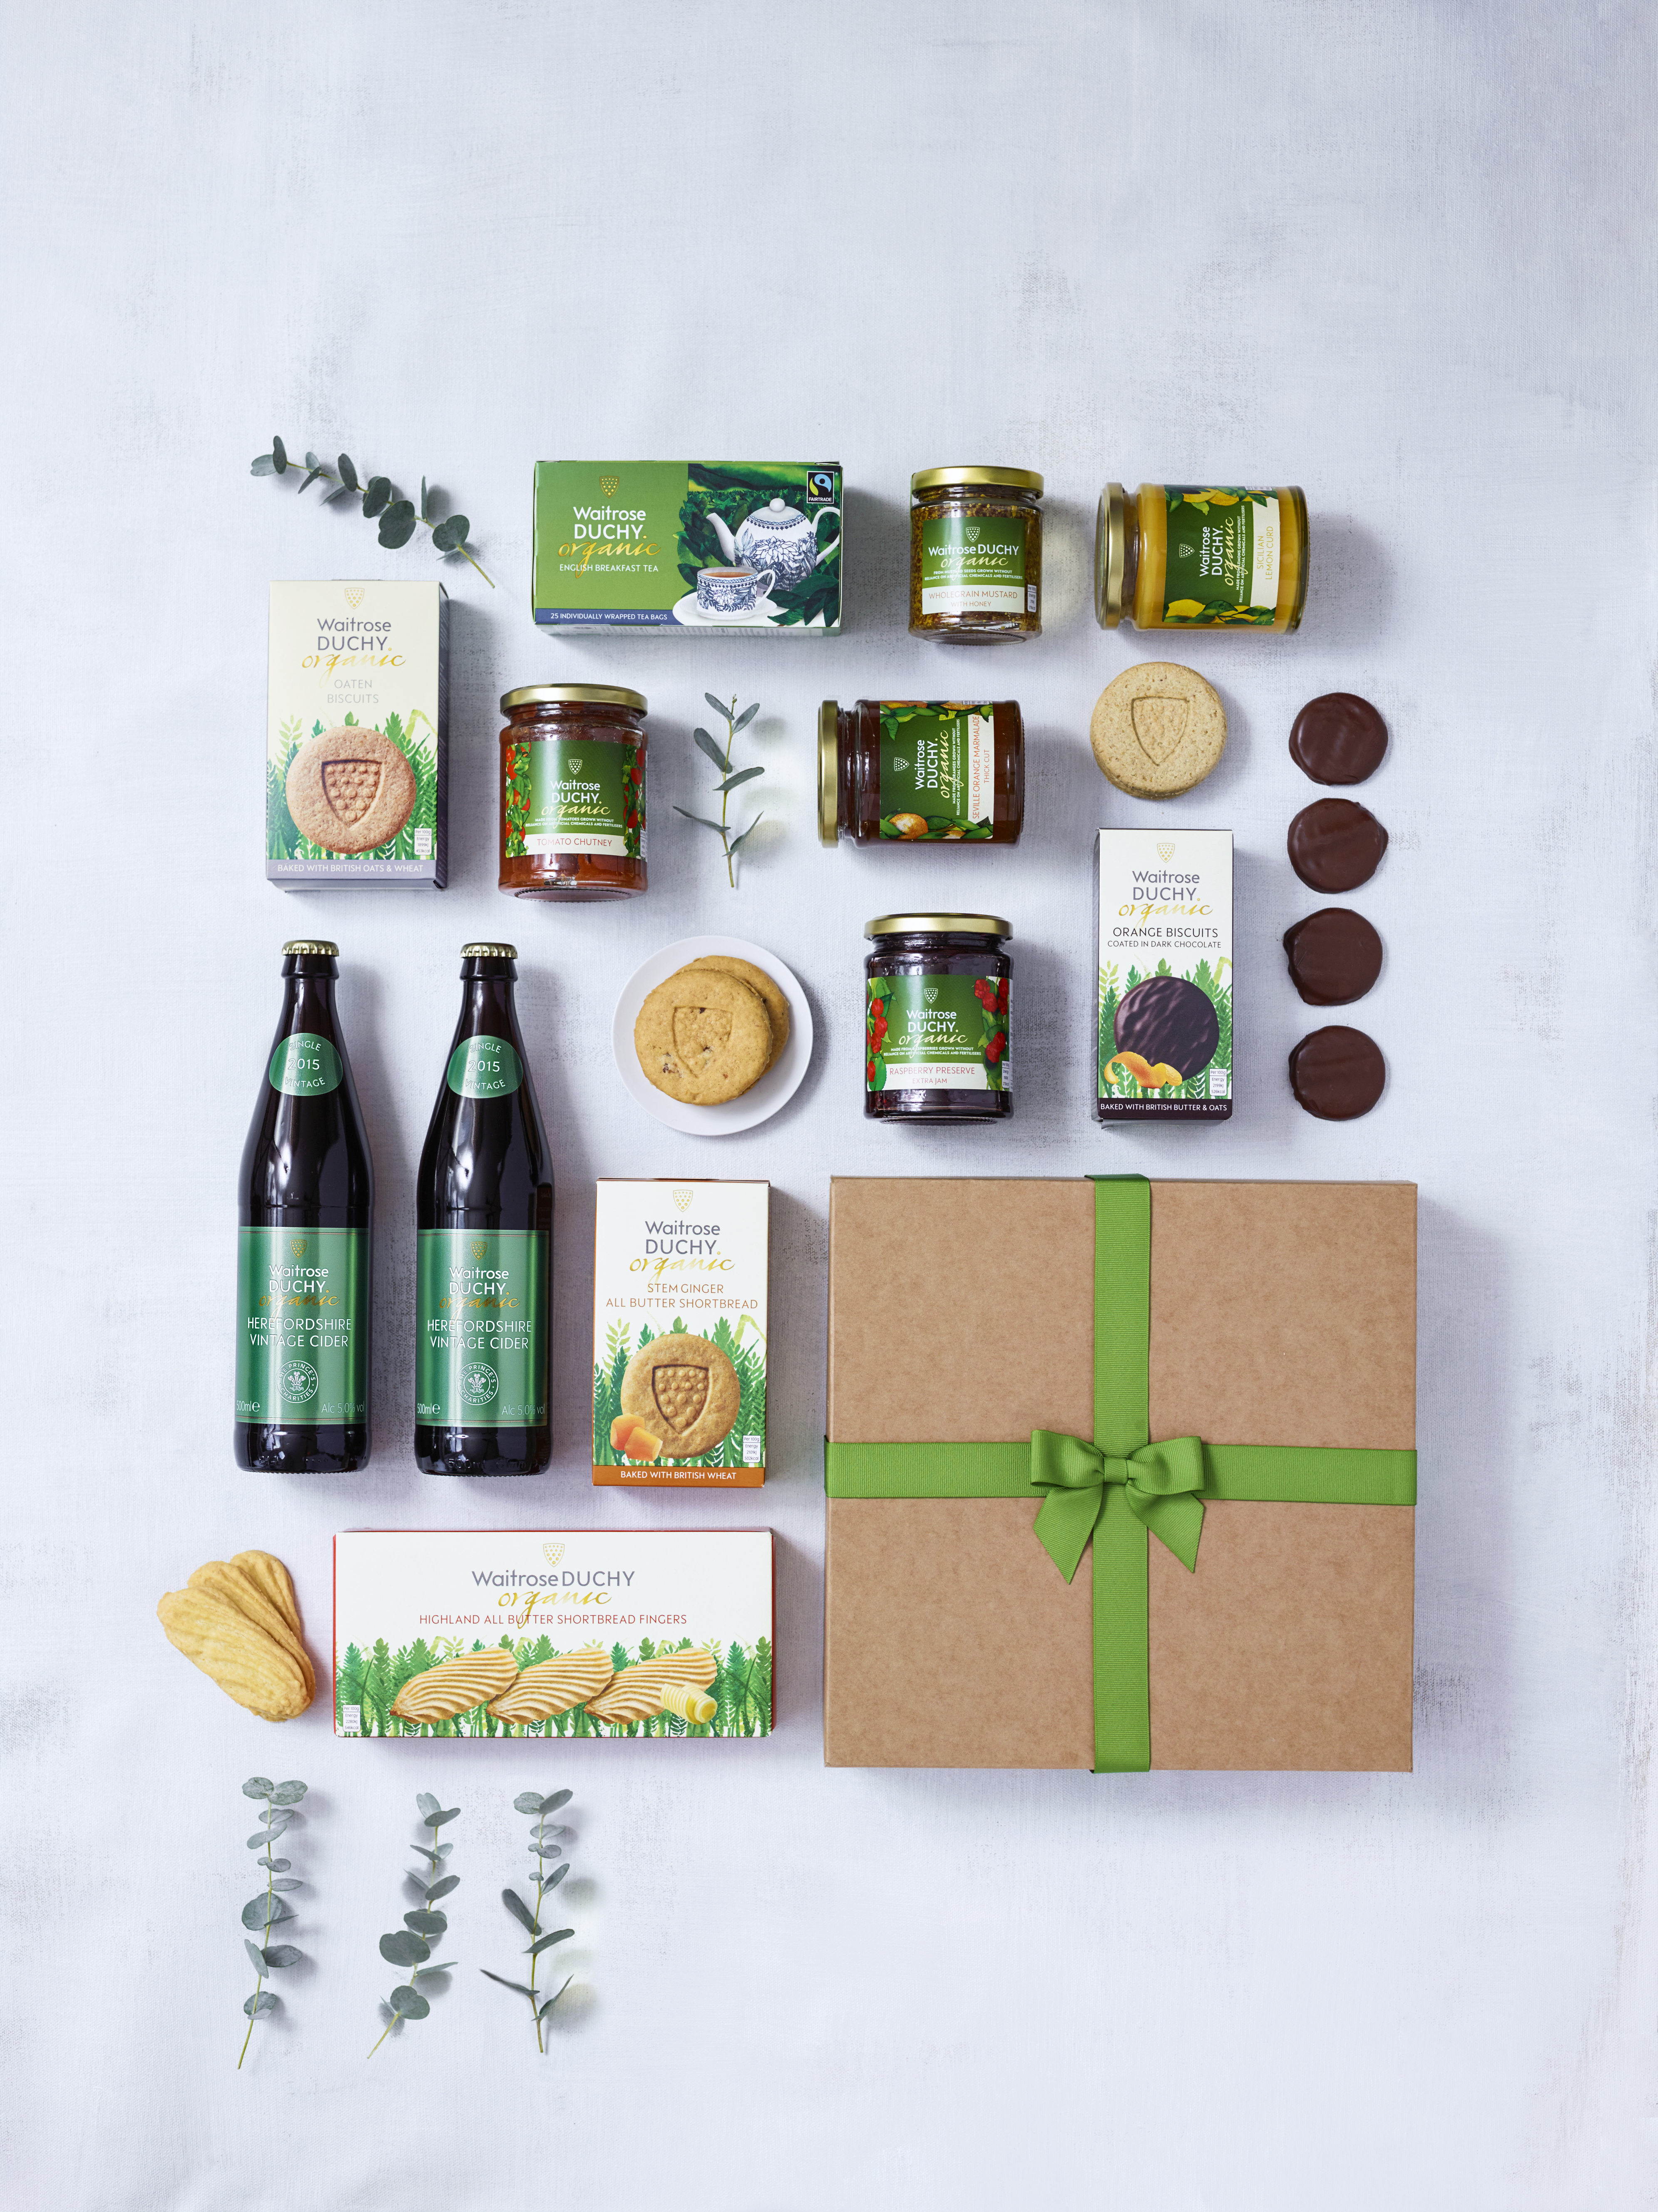 A selection of Waitrose Duchy Organic products laid out on display.